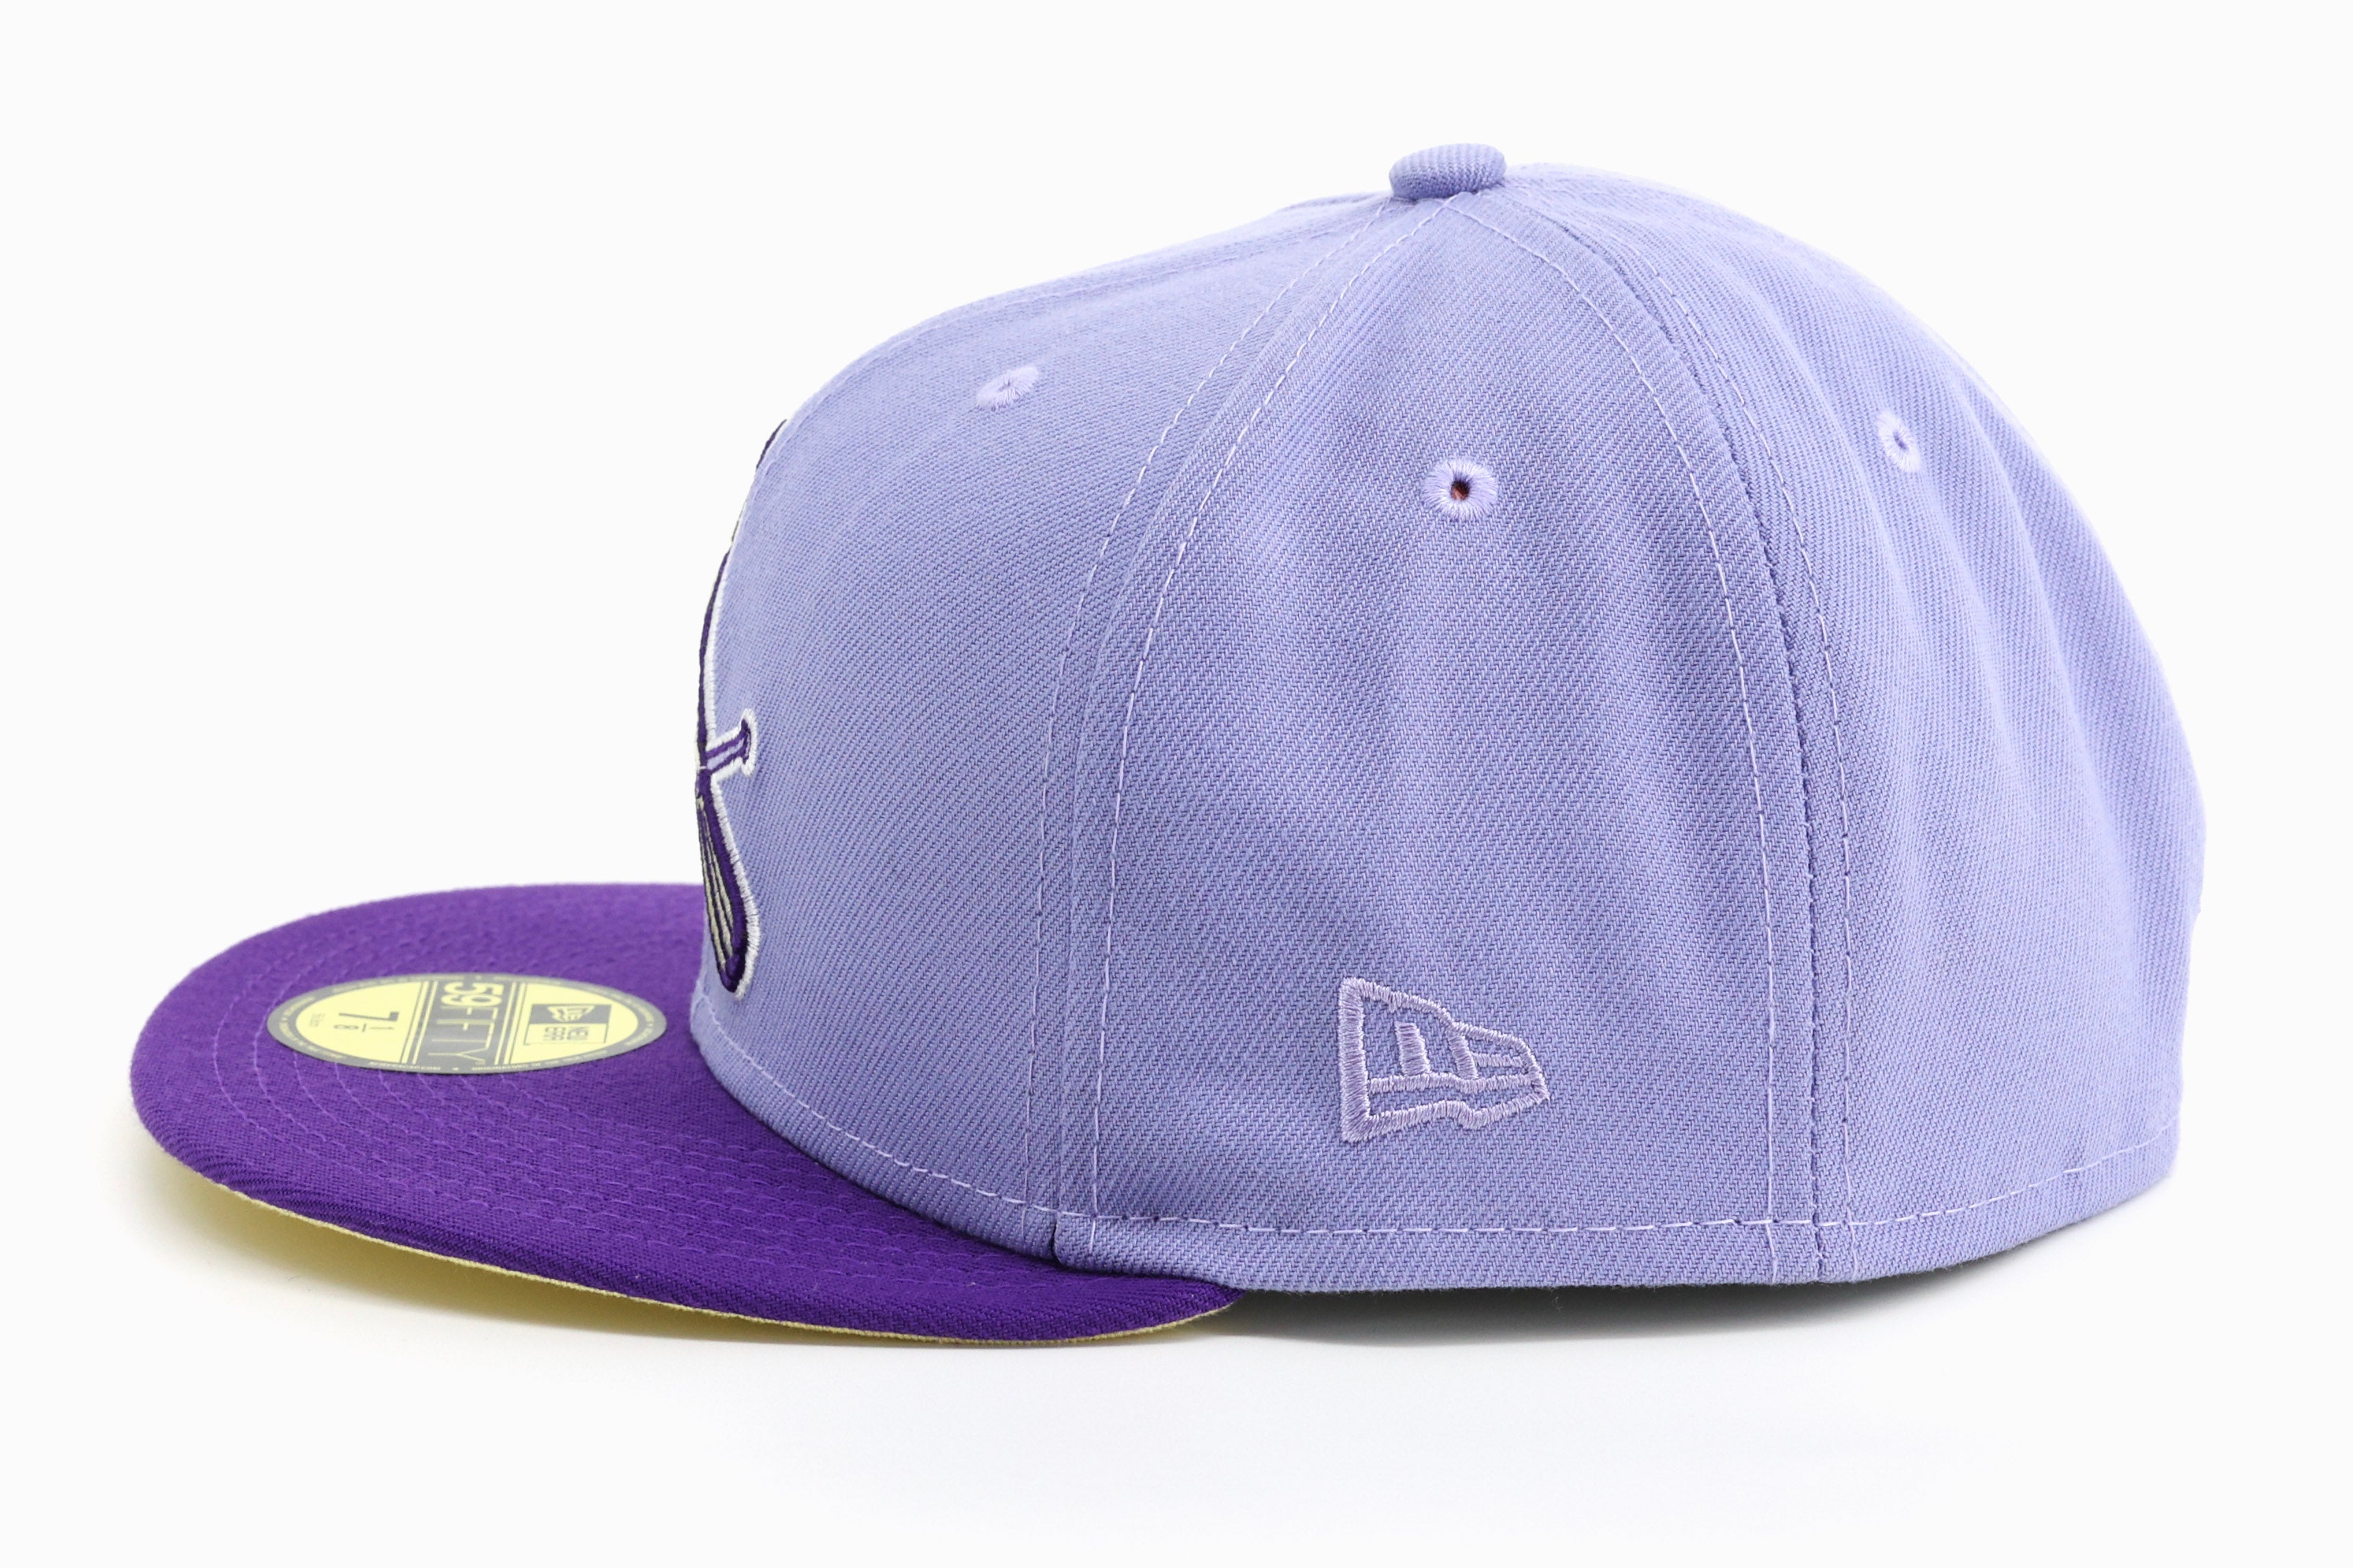 purple St. Louis Cardinals hat. Where do I get this?!?!